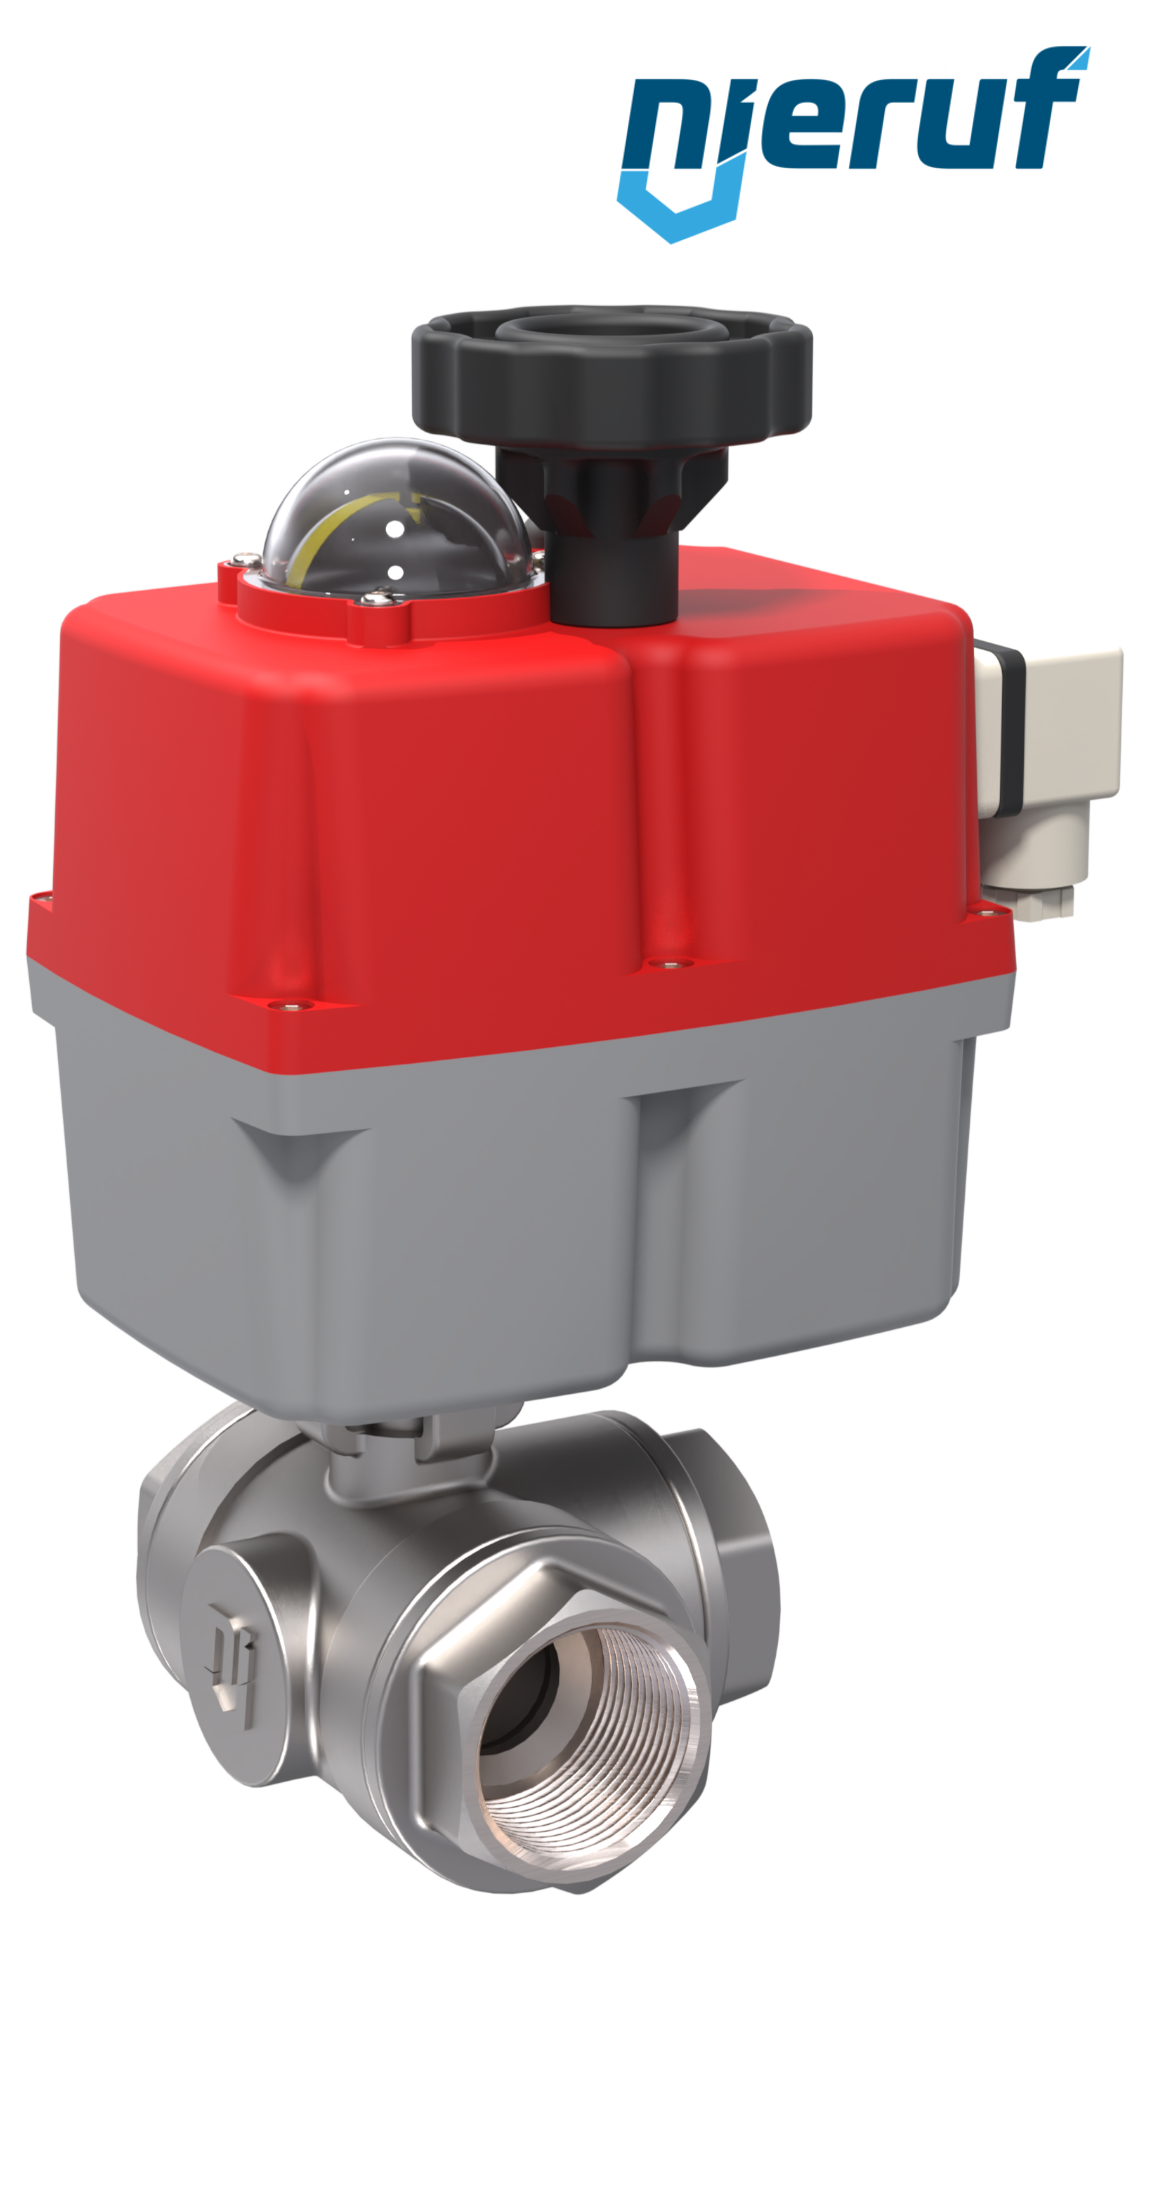 3 way automatic-ball valve 24-240V DN8 - 1/4" inch stainless steel reduced port design with L drilling